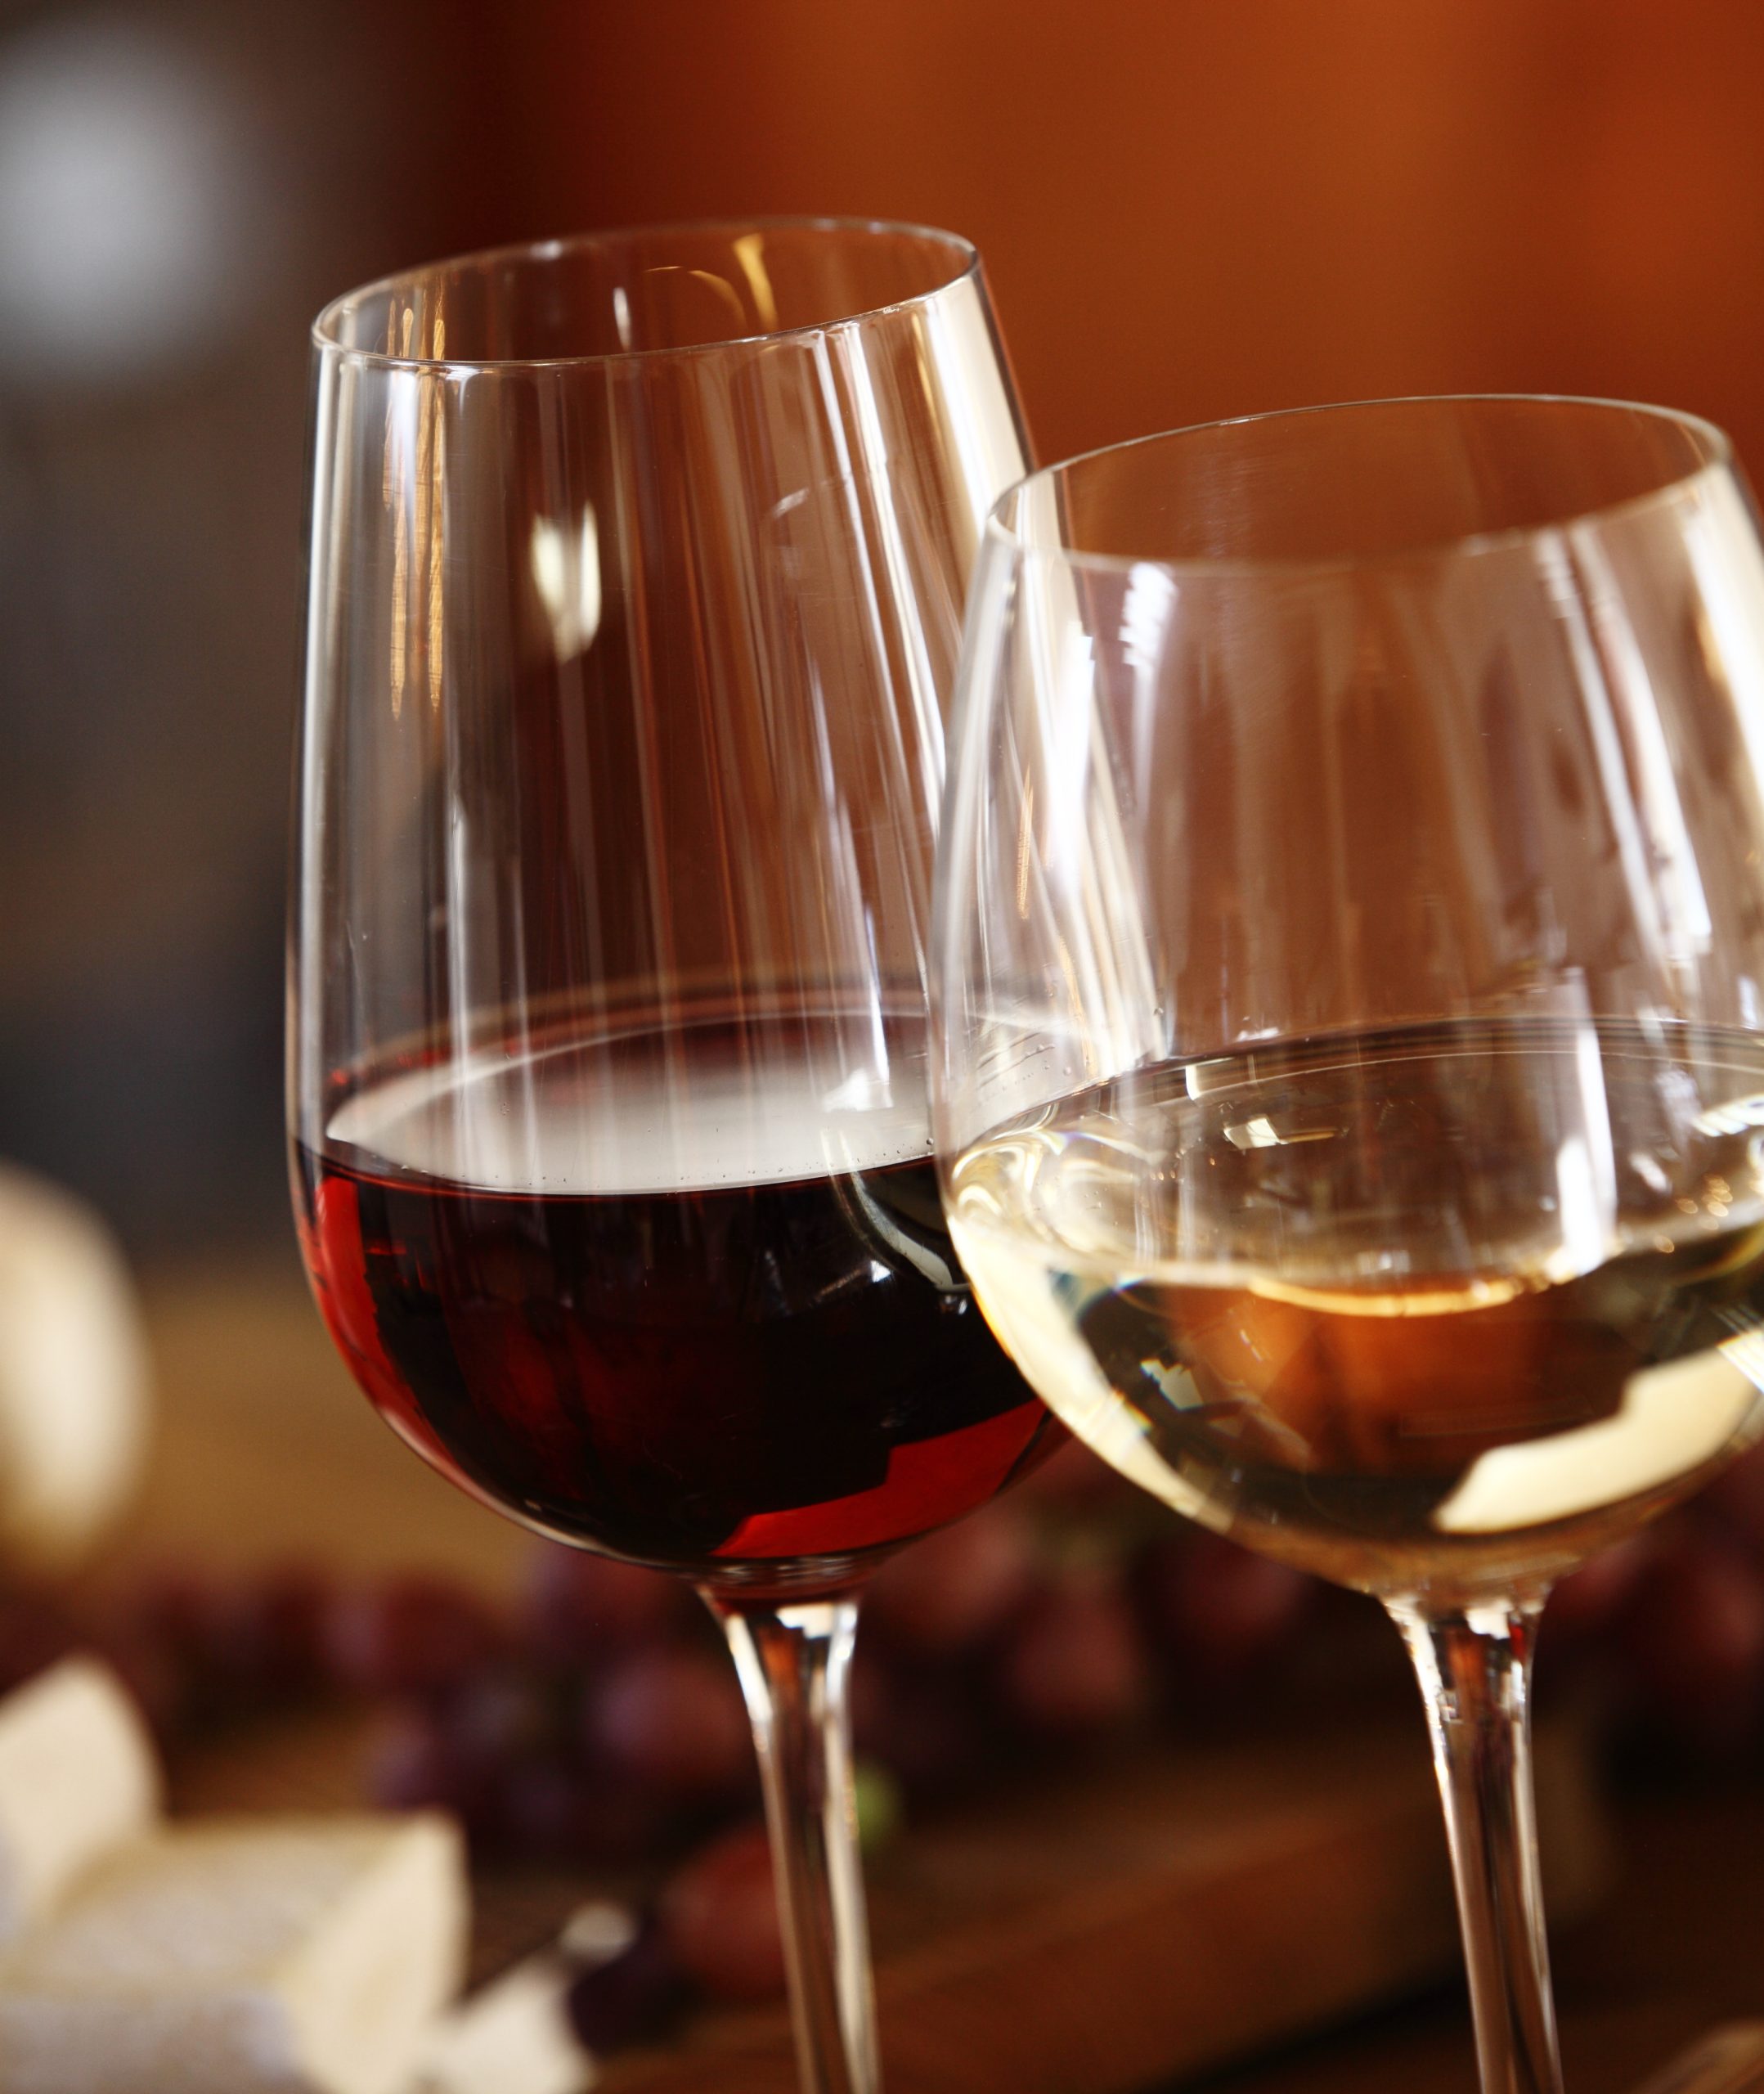 The Grand Old House presents a special wine tasting event 9 March